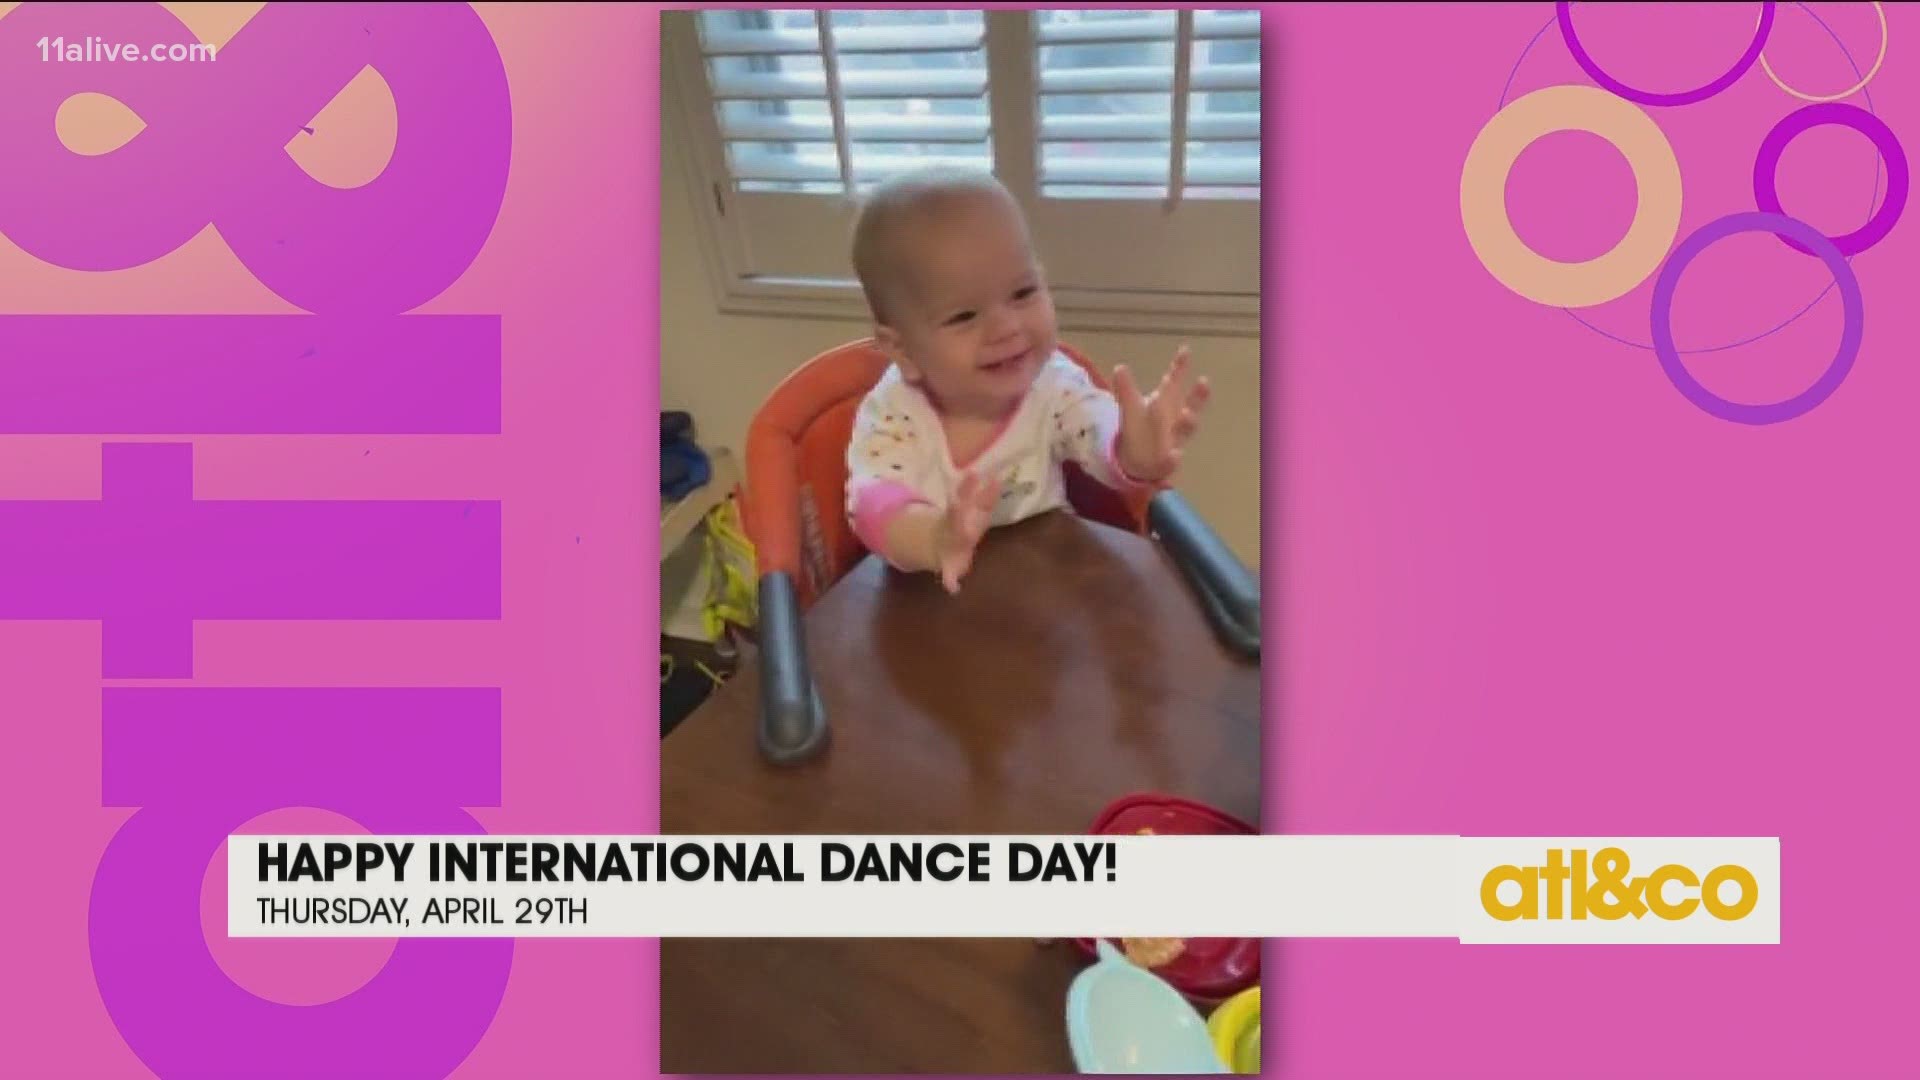 Dance it out this International Dance Day! We're celebrating with our tiny dancer little Liza Kneer.